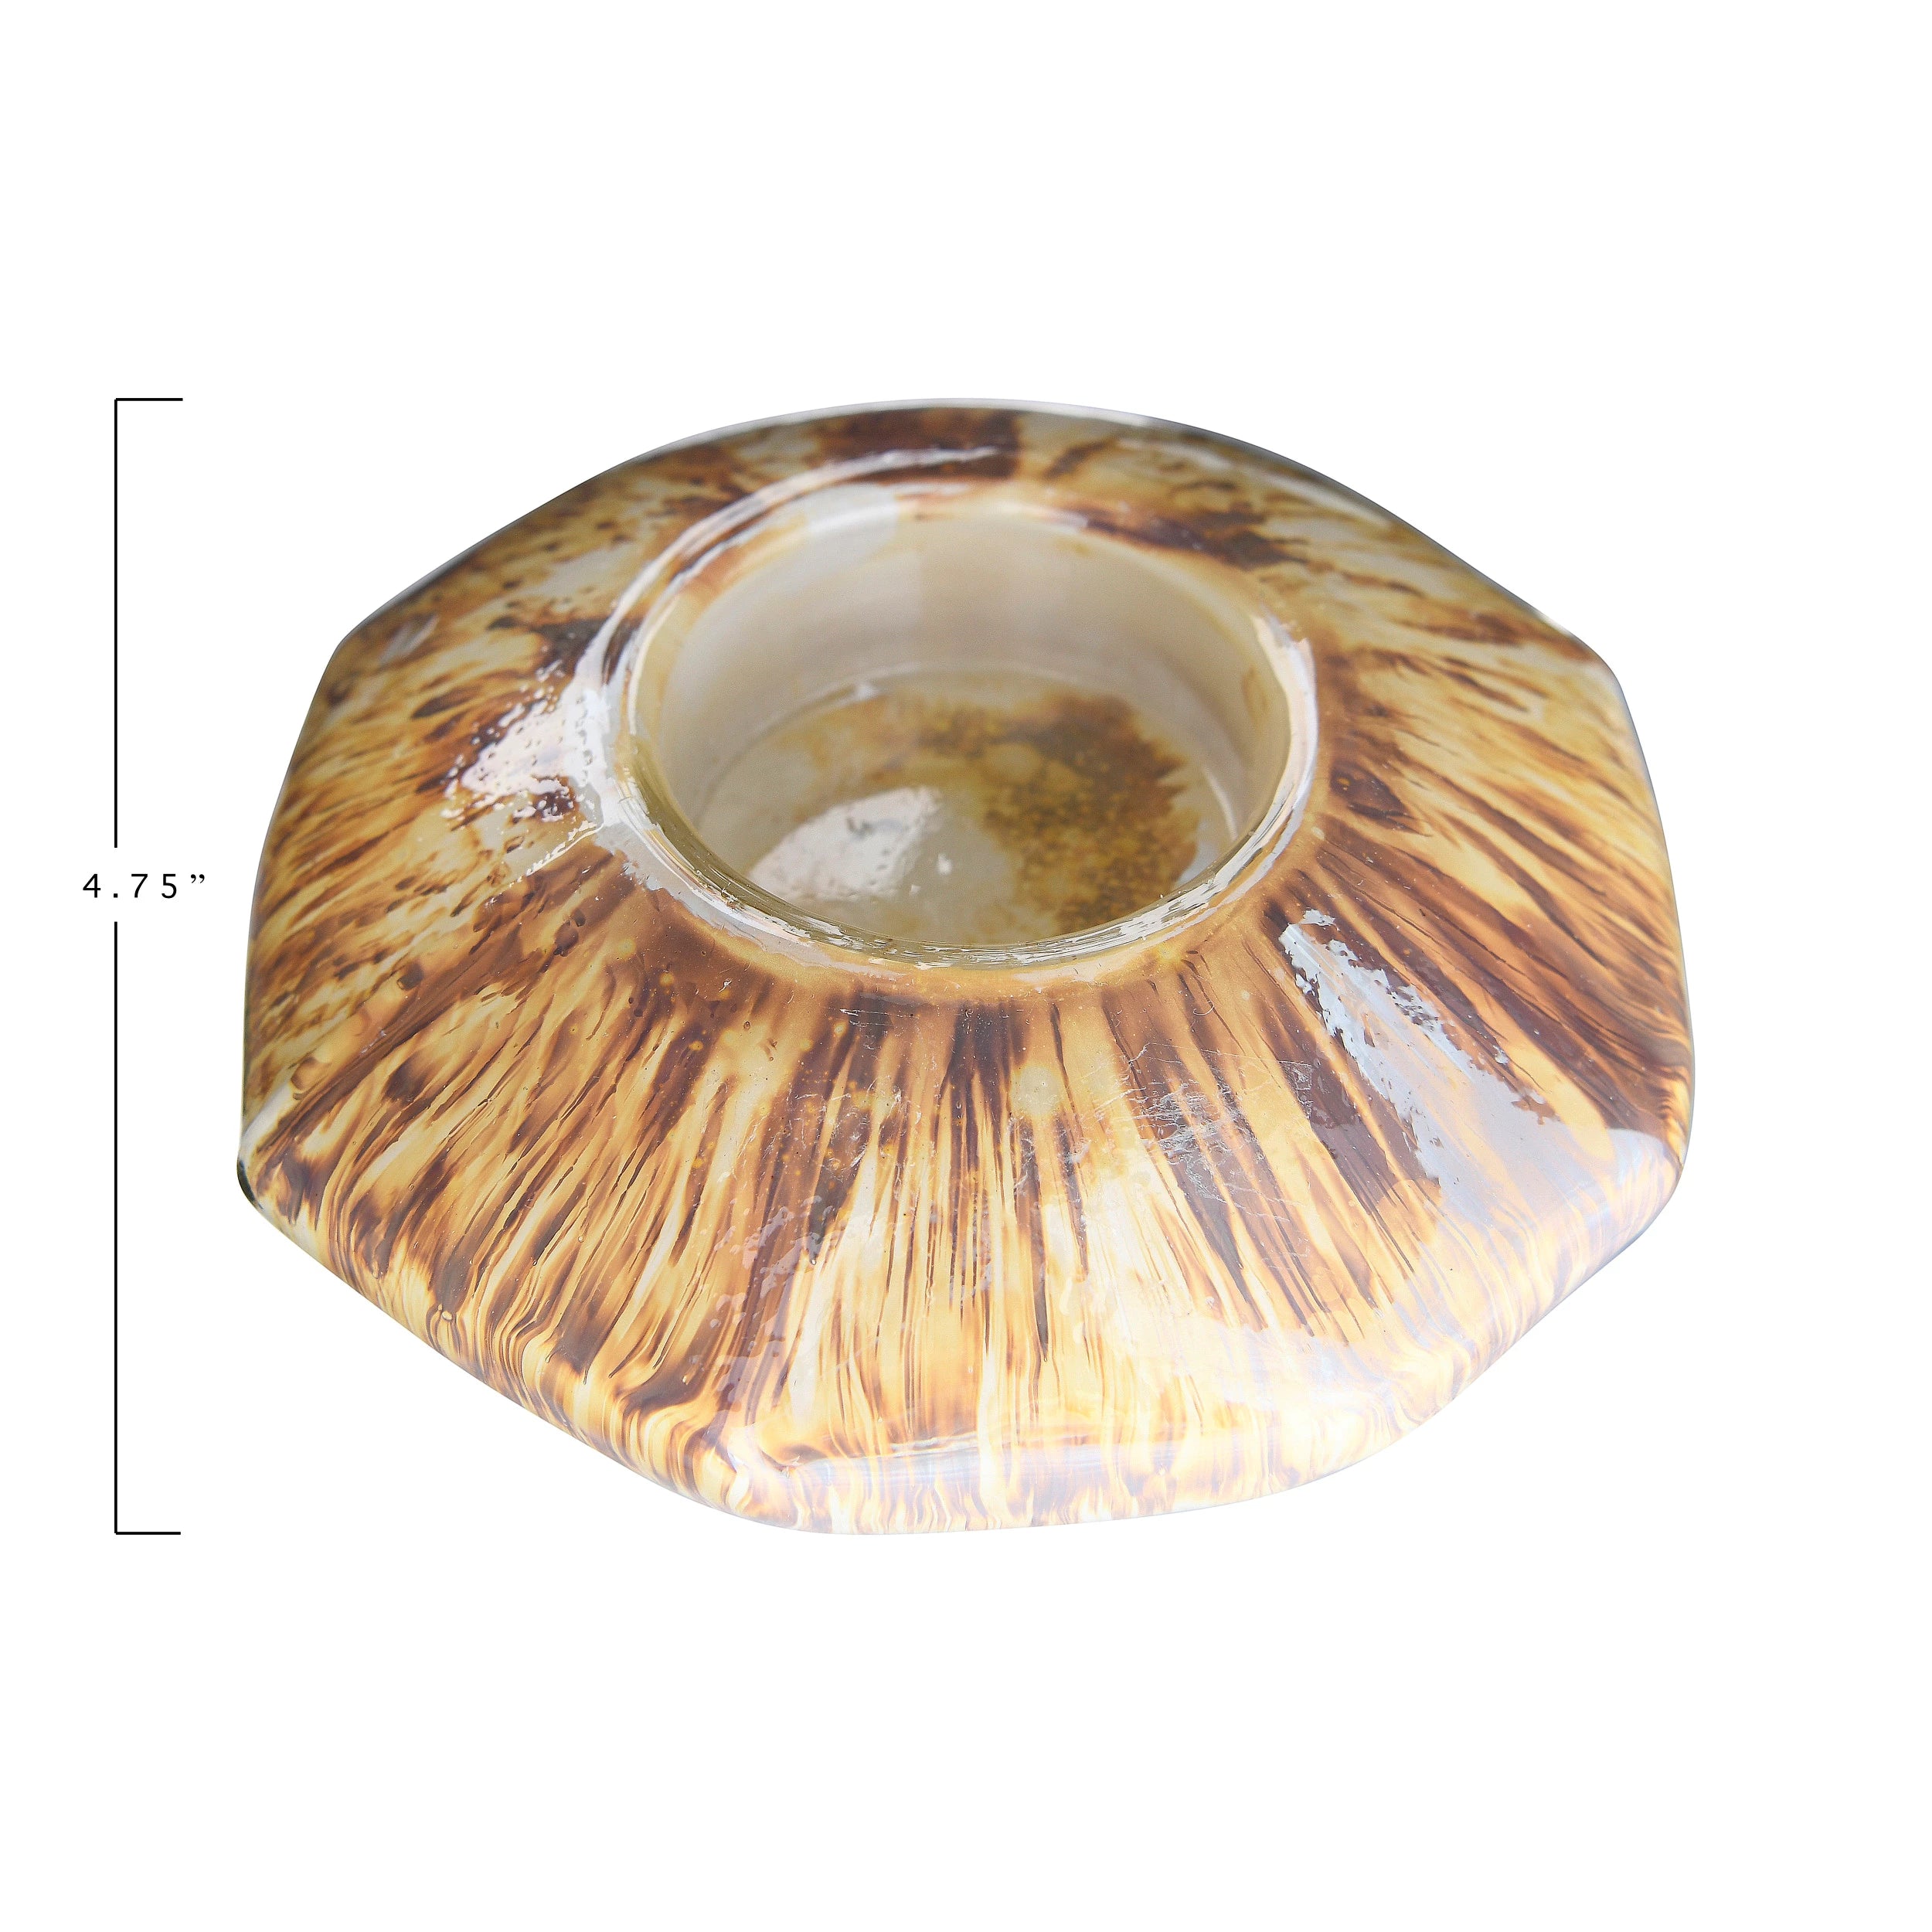 Add warmth to the room decor by lighting a votive candle in this Glass Tealight Holder with distressed opal finish.  Size: 4-1/4" Round x 2"H